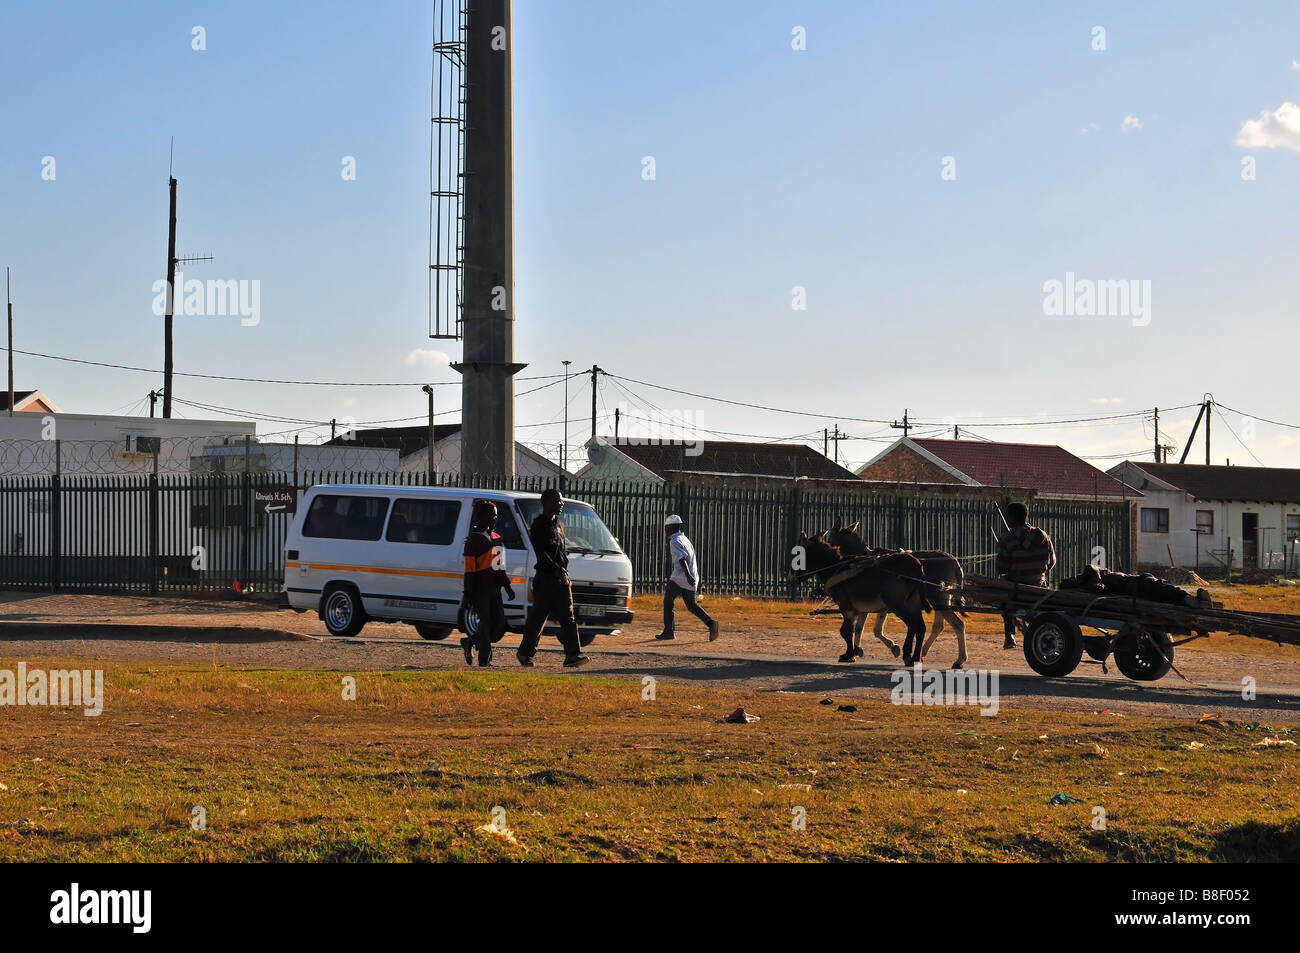 Minibus taxi and donkey cart transport in the townships of Grahamstown, South Africa Stock Photo